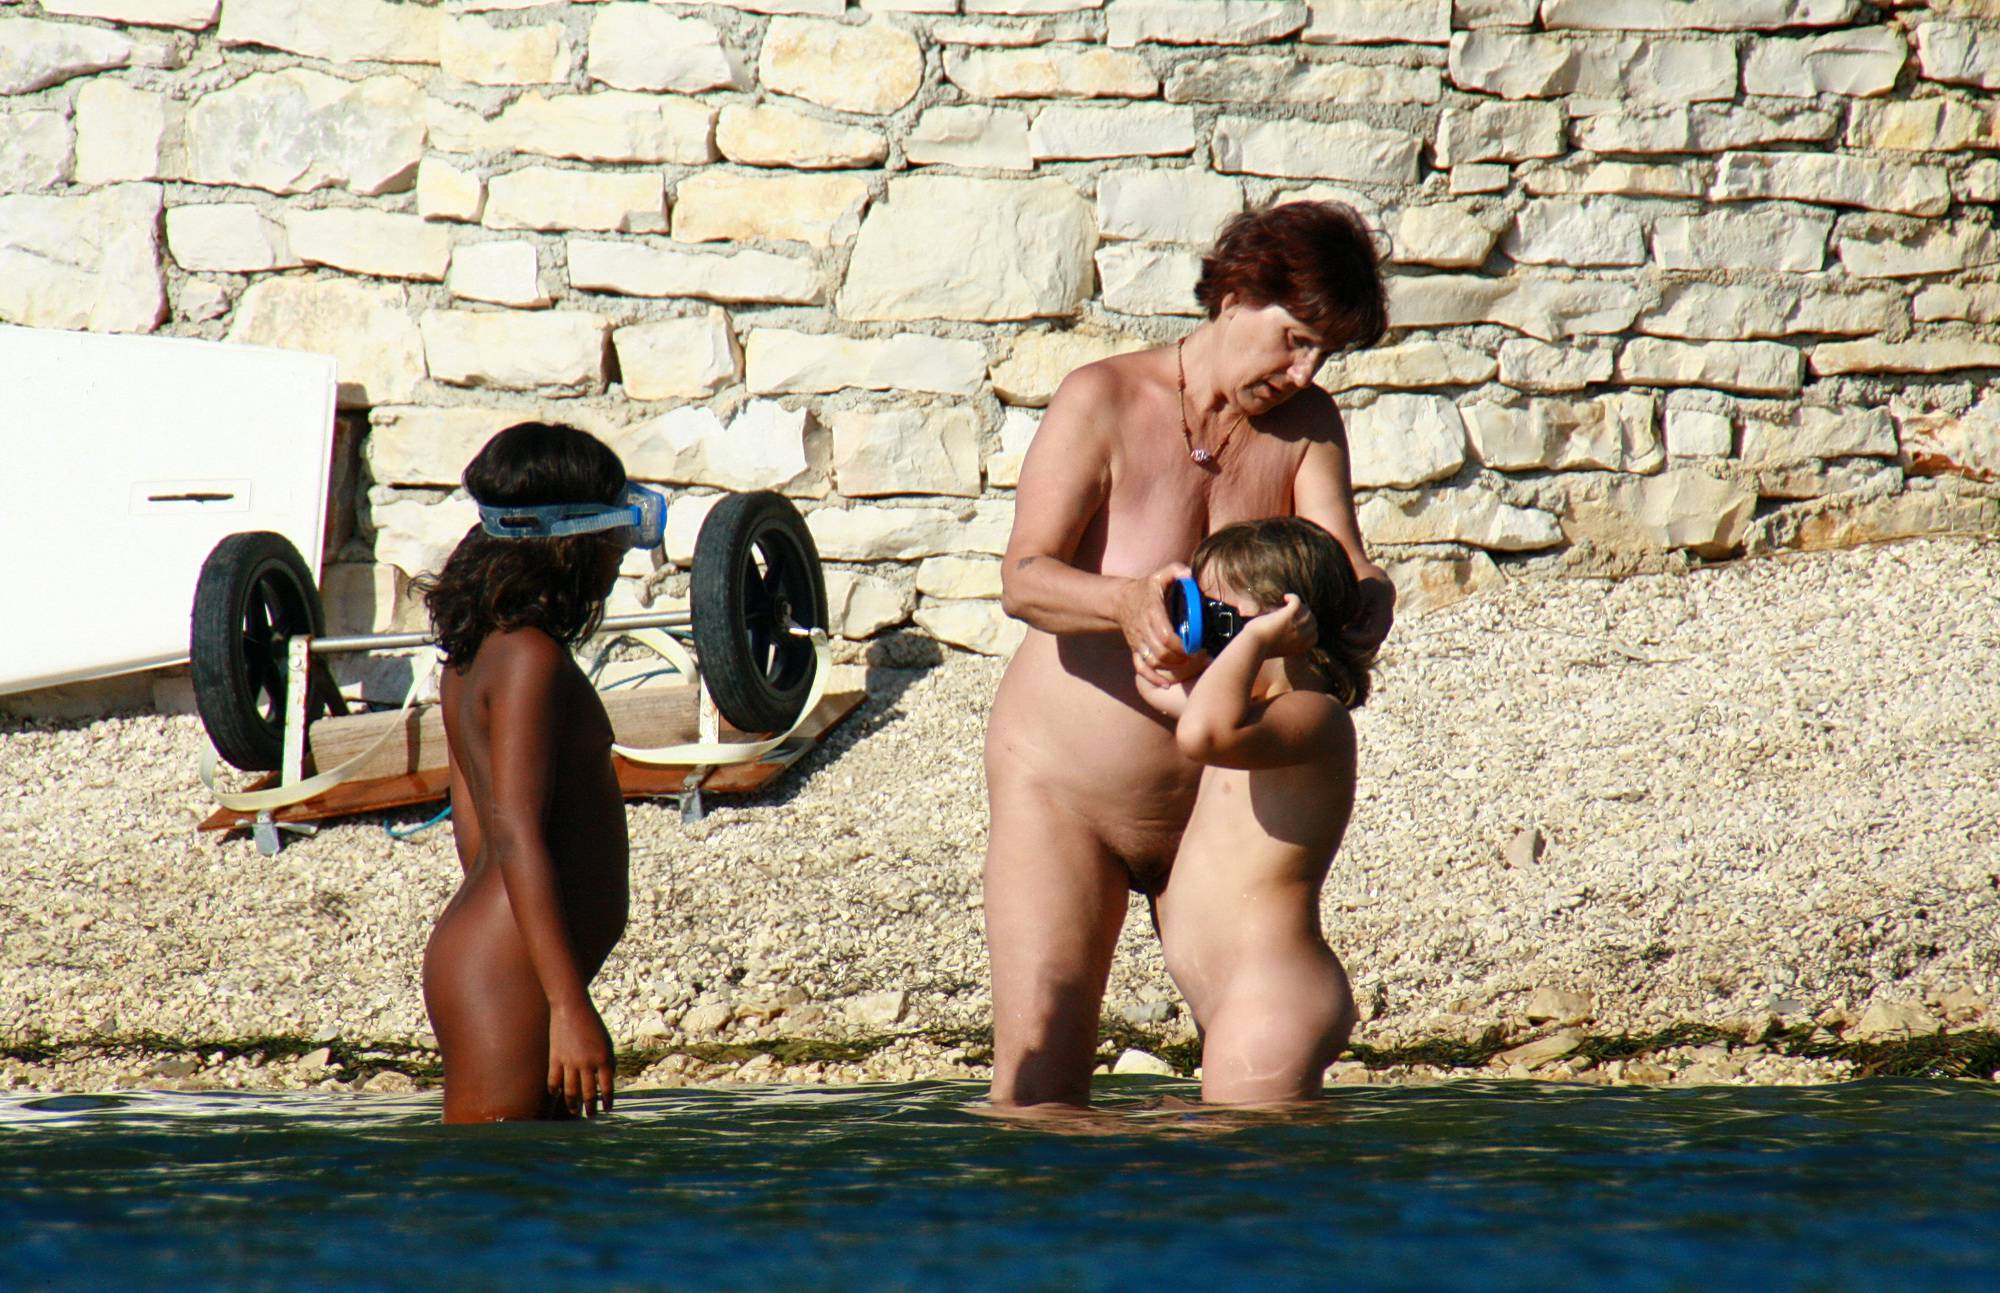 Nudist Teens Dipping Into The Lake - 3